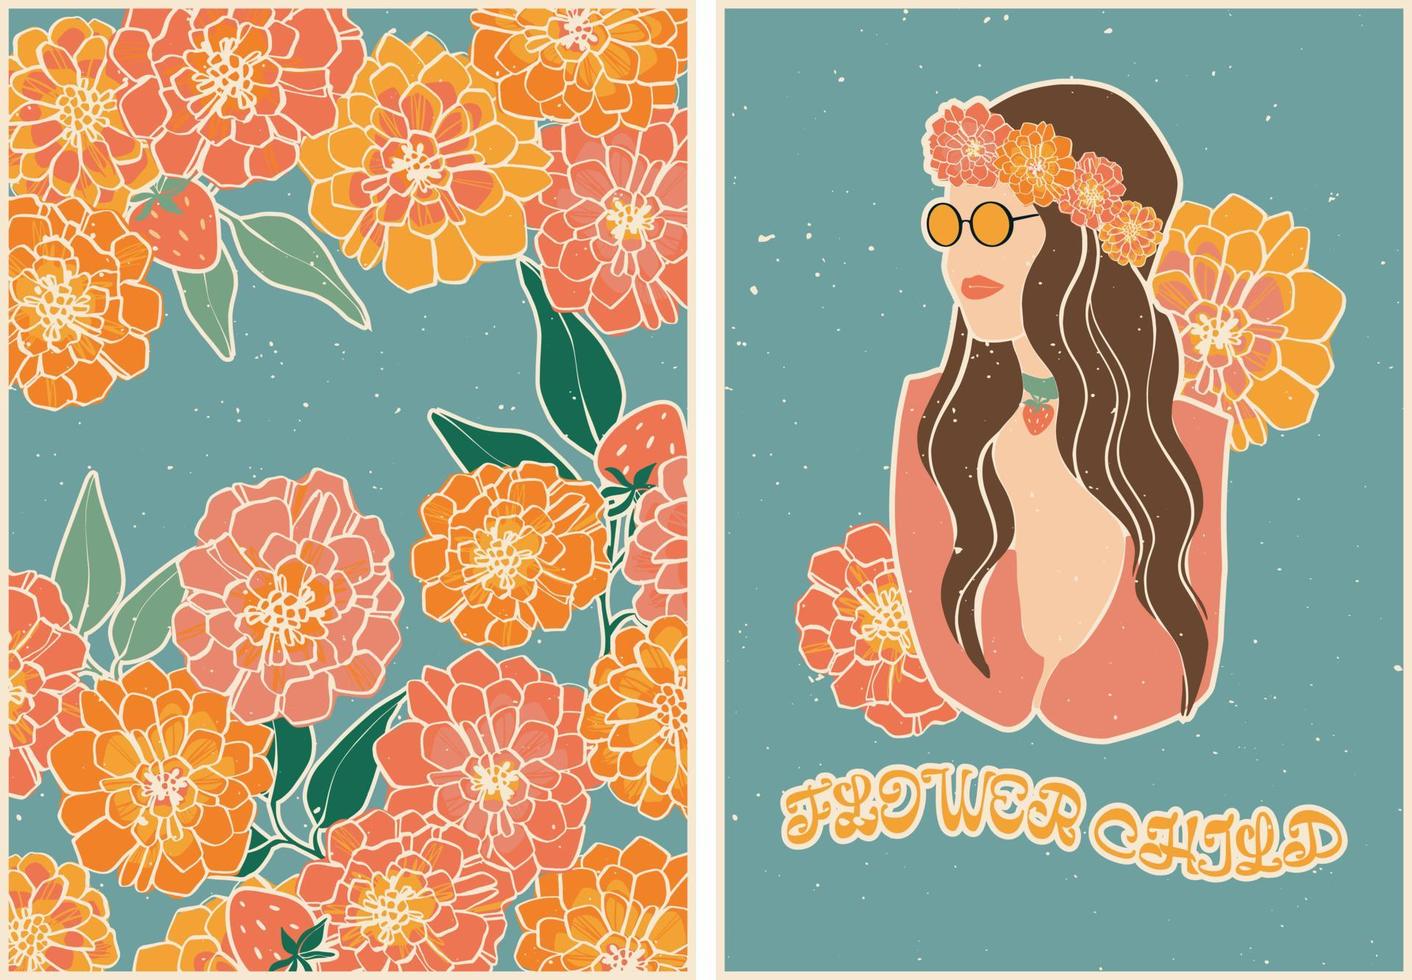 Set of posters in retro style with flowers, strawberries and a girl in a floral wreath and sunglasses. Vintage retro style. 60s, 70s, hippies. Set of postcard, poster design. vector